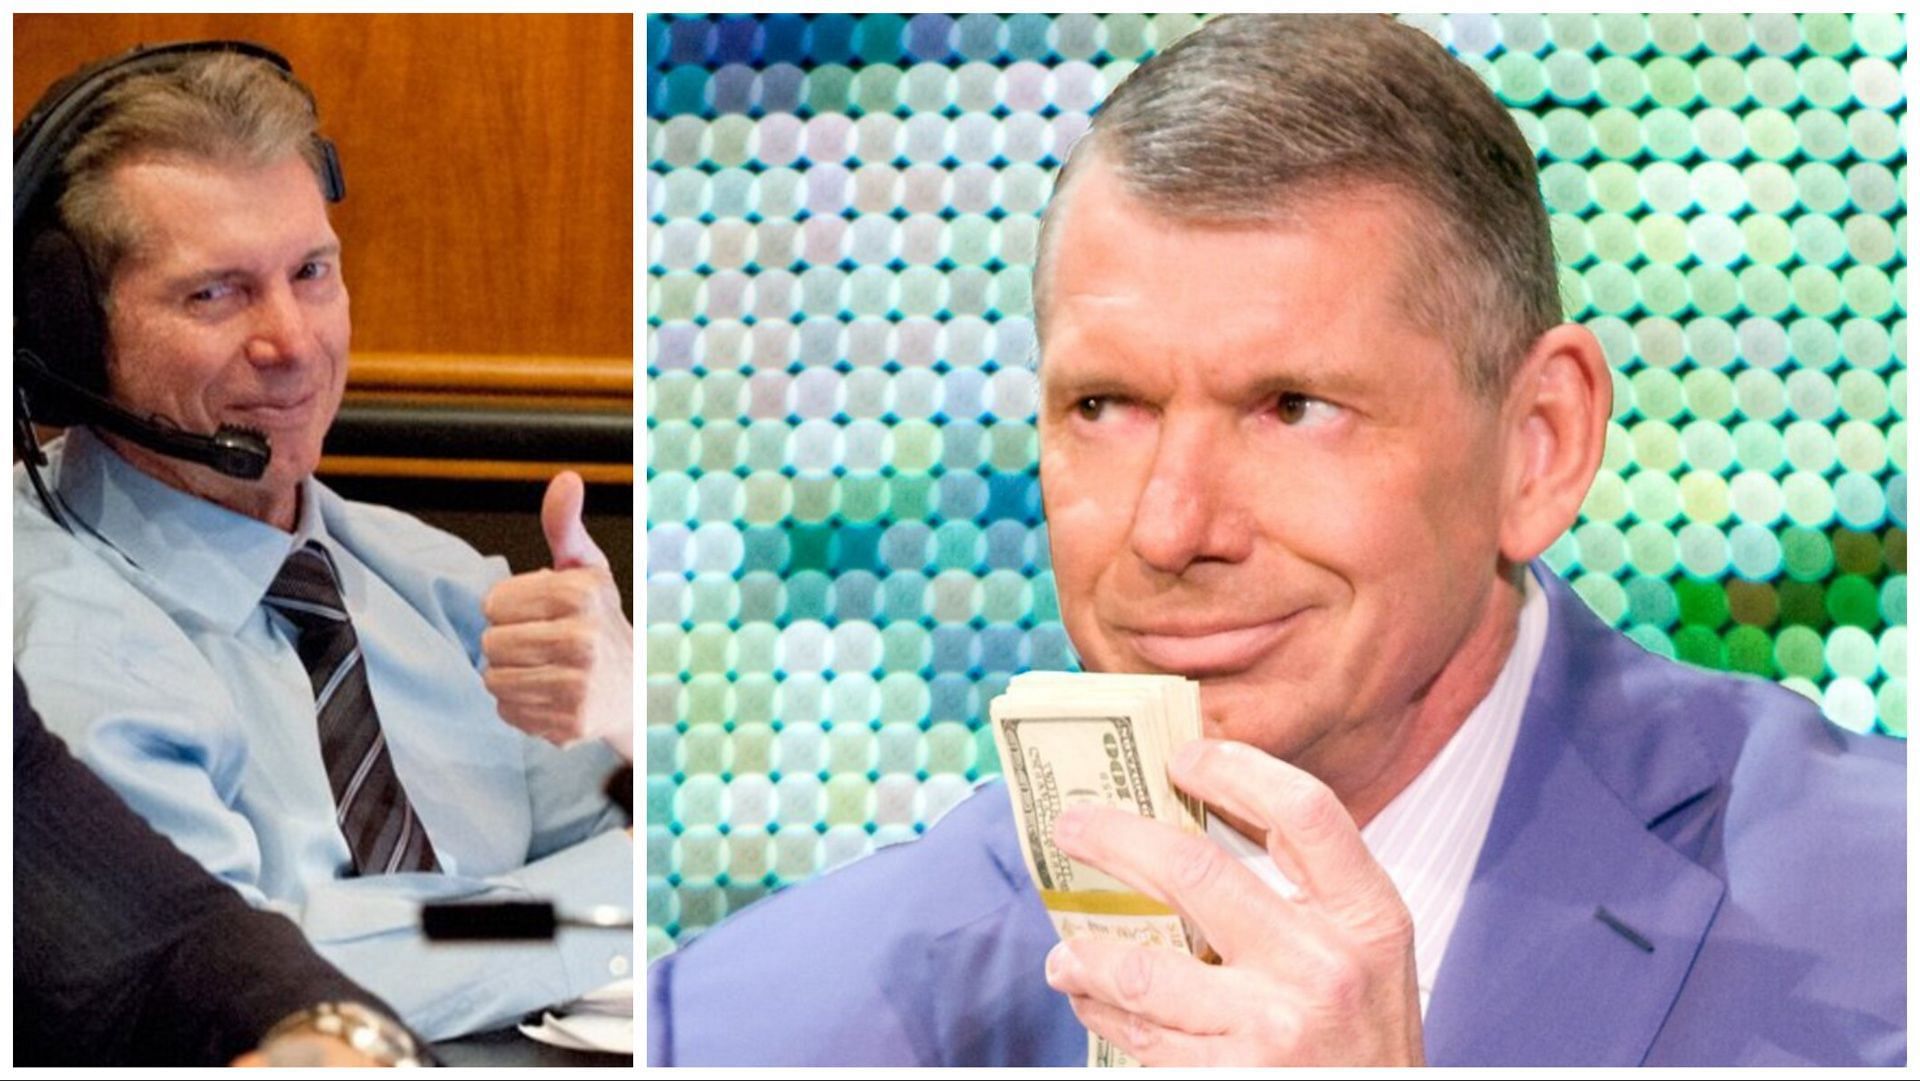 Vince McMahon works backstage at a WWE show, Mr. McMahon smells the money on RAW